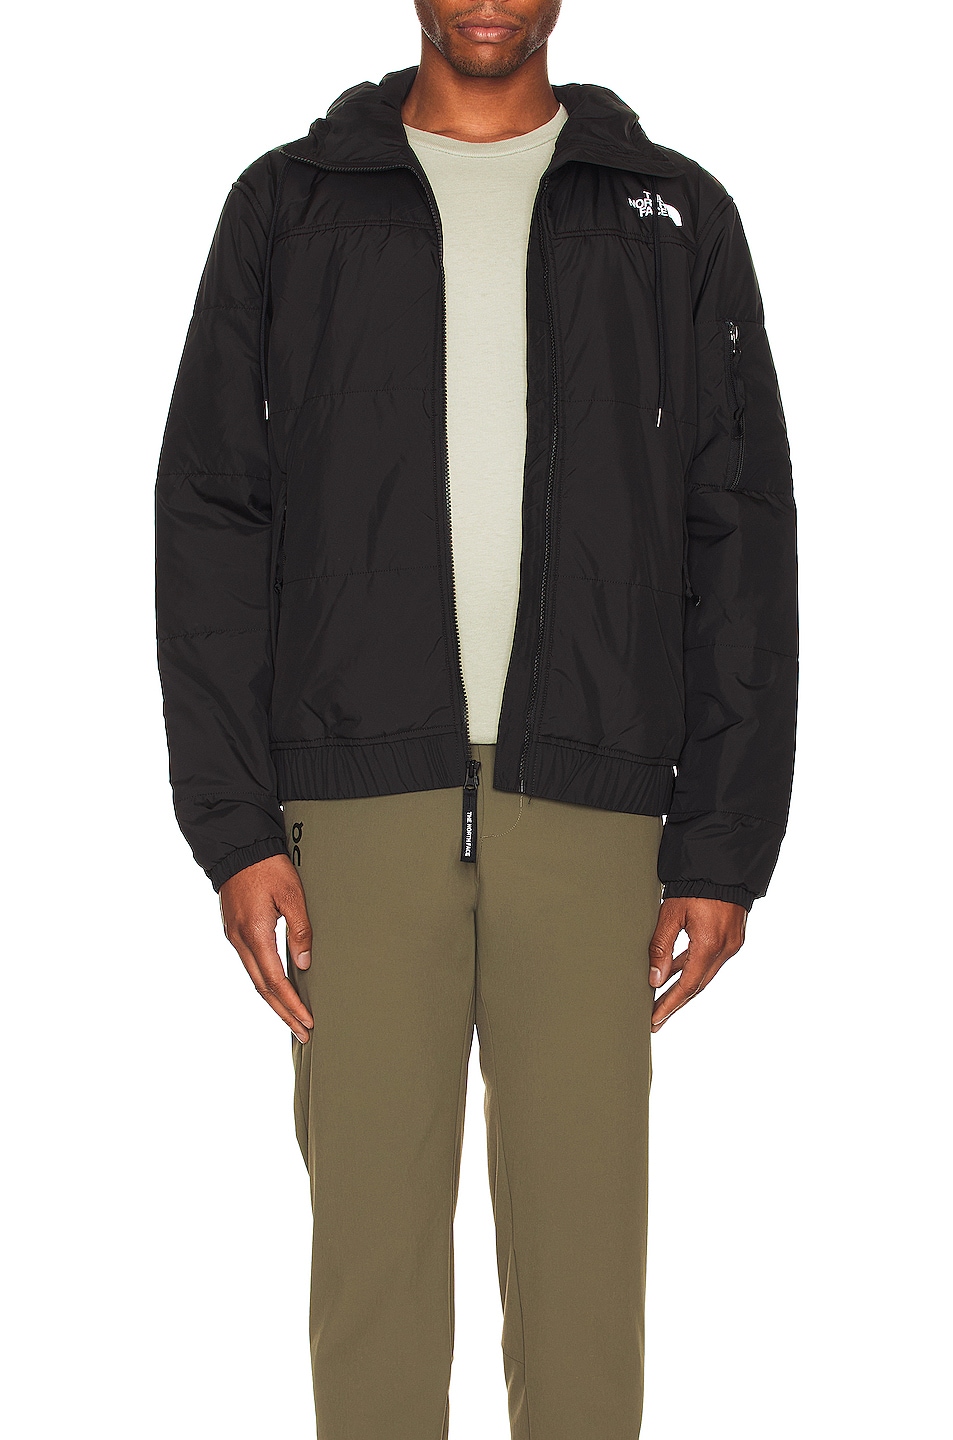 The North Face Highrail Bomber Jacket in TNF Black | FWRD